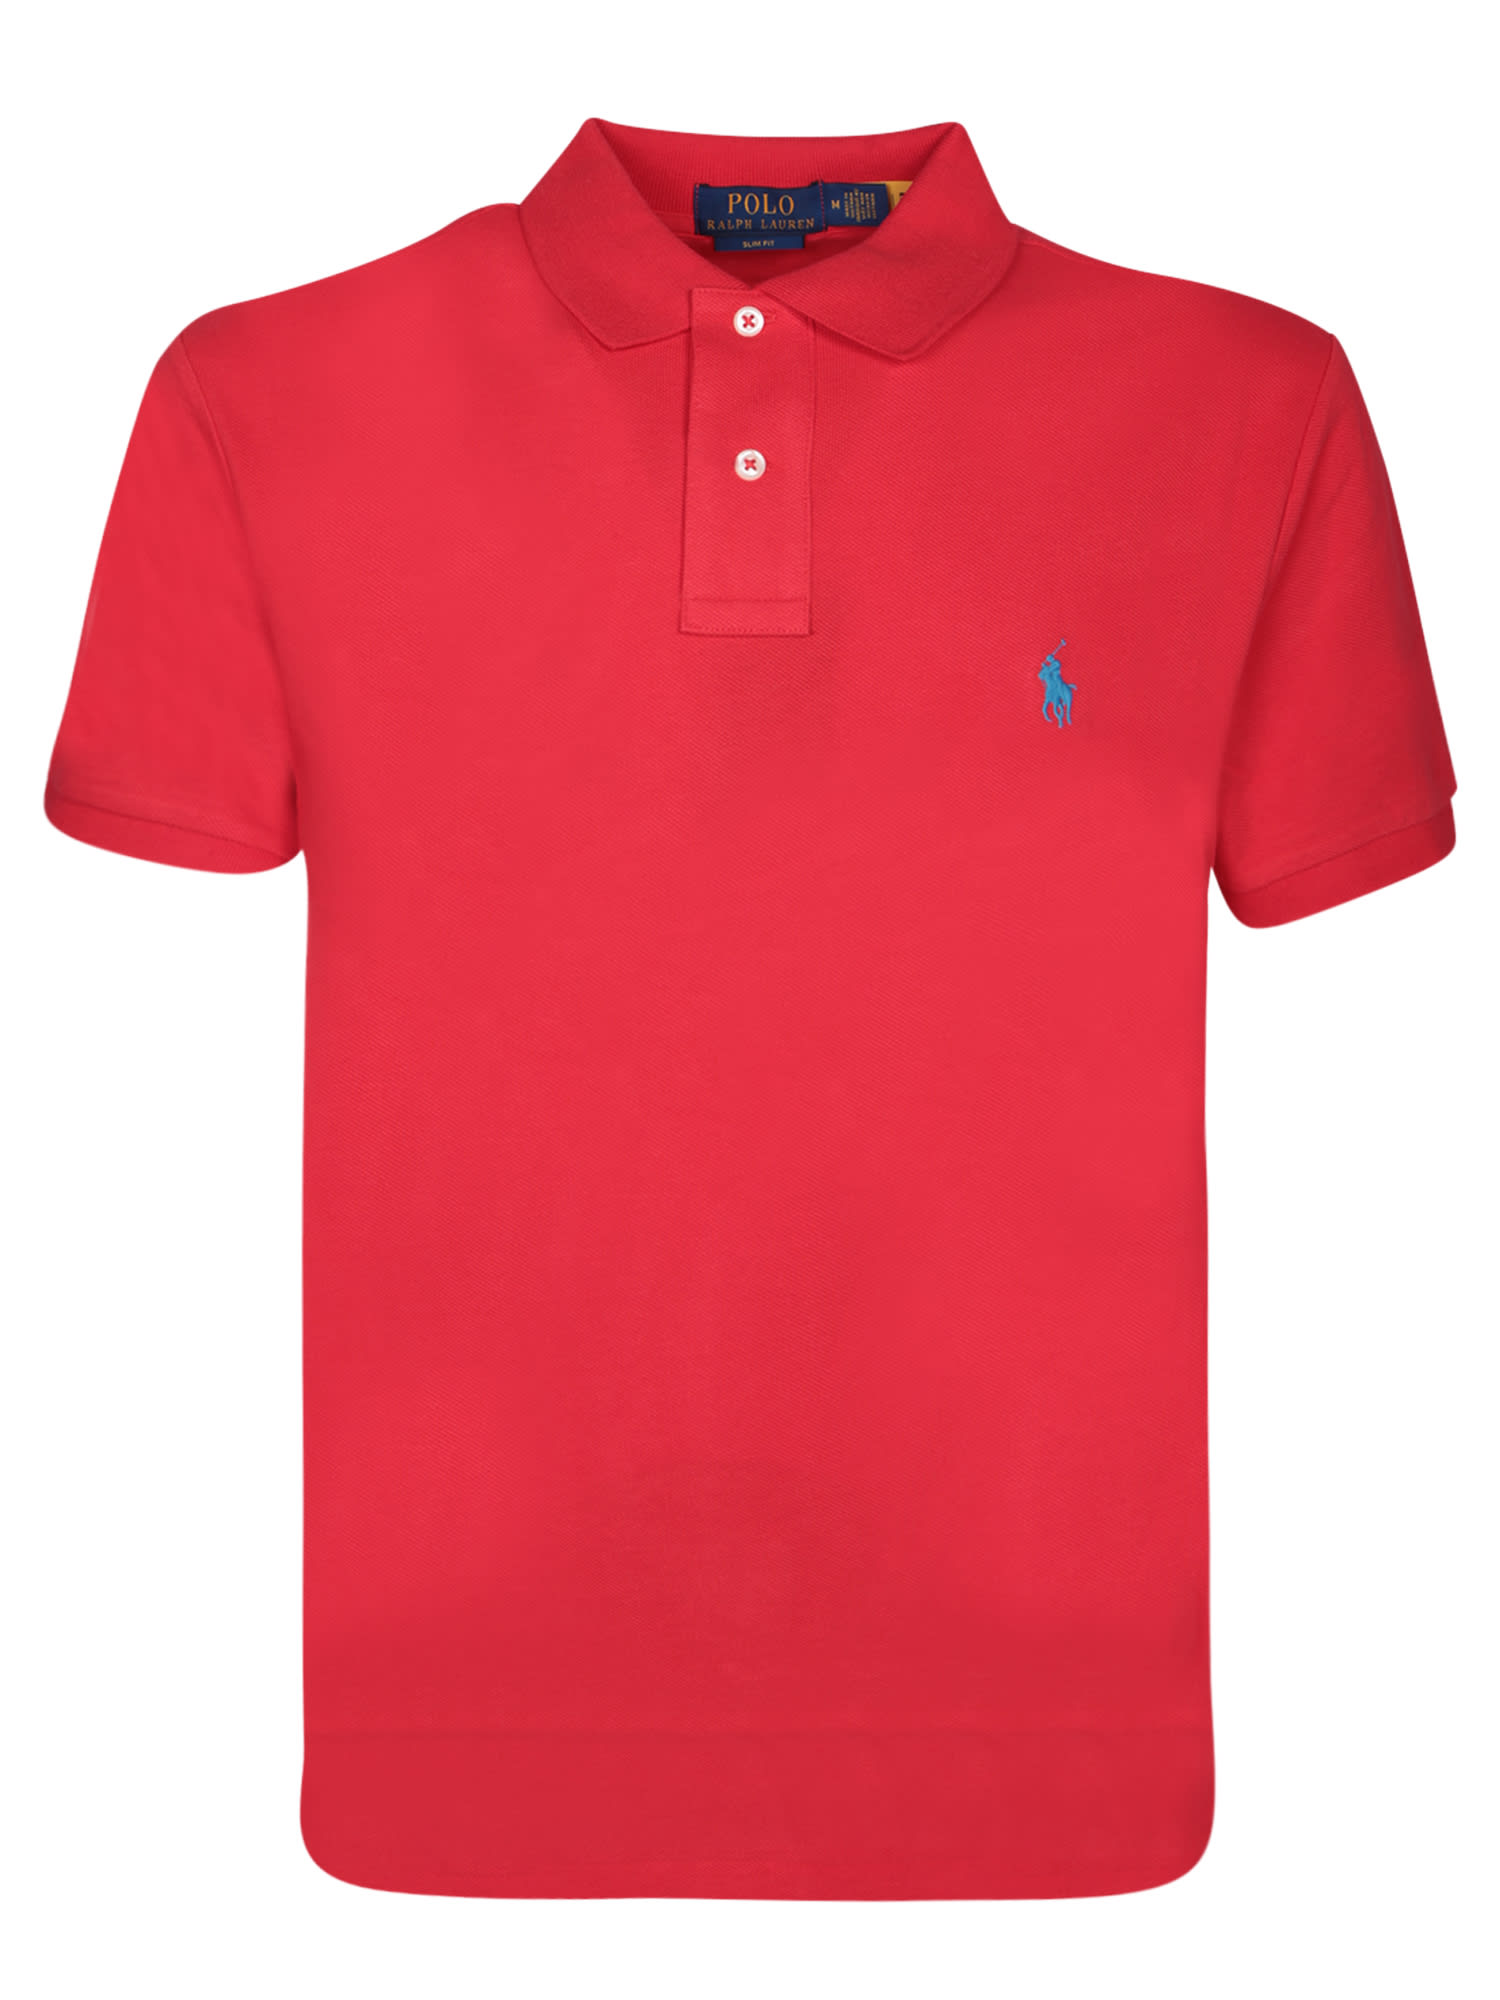 Slim Fit Red Piquet Polo Shirt By Polo Ralph Lauren